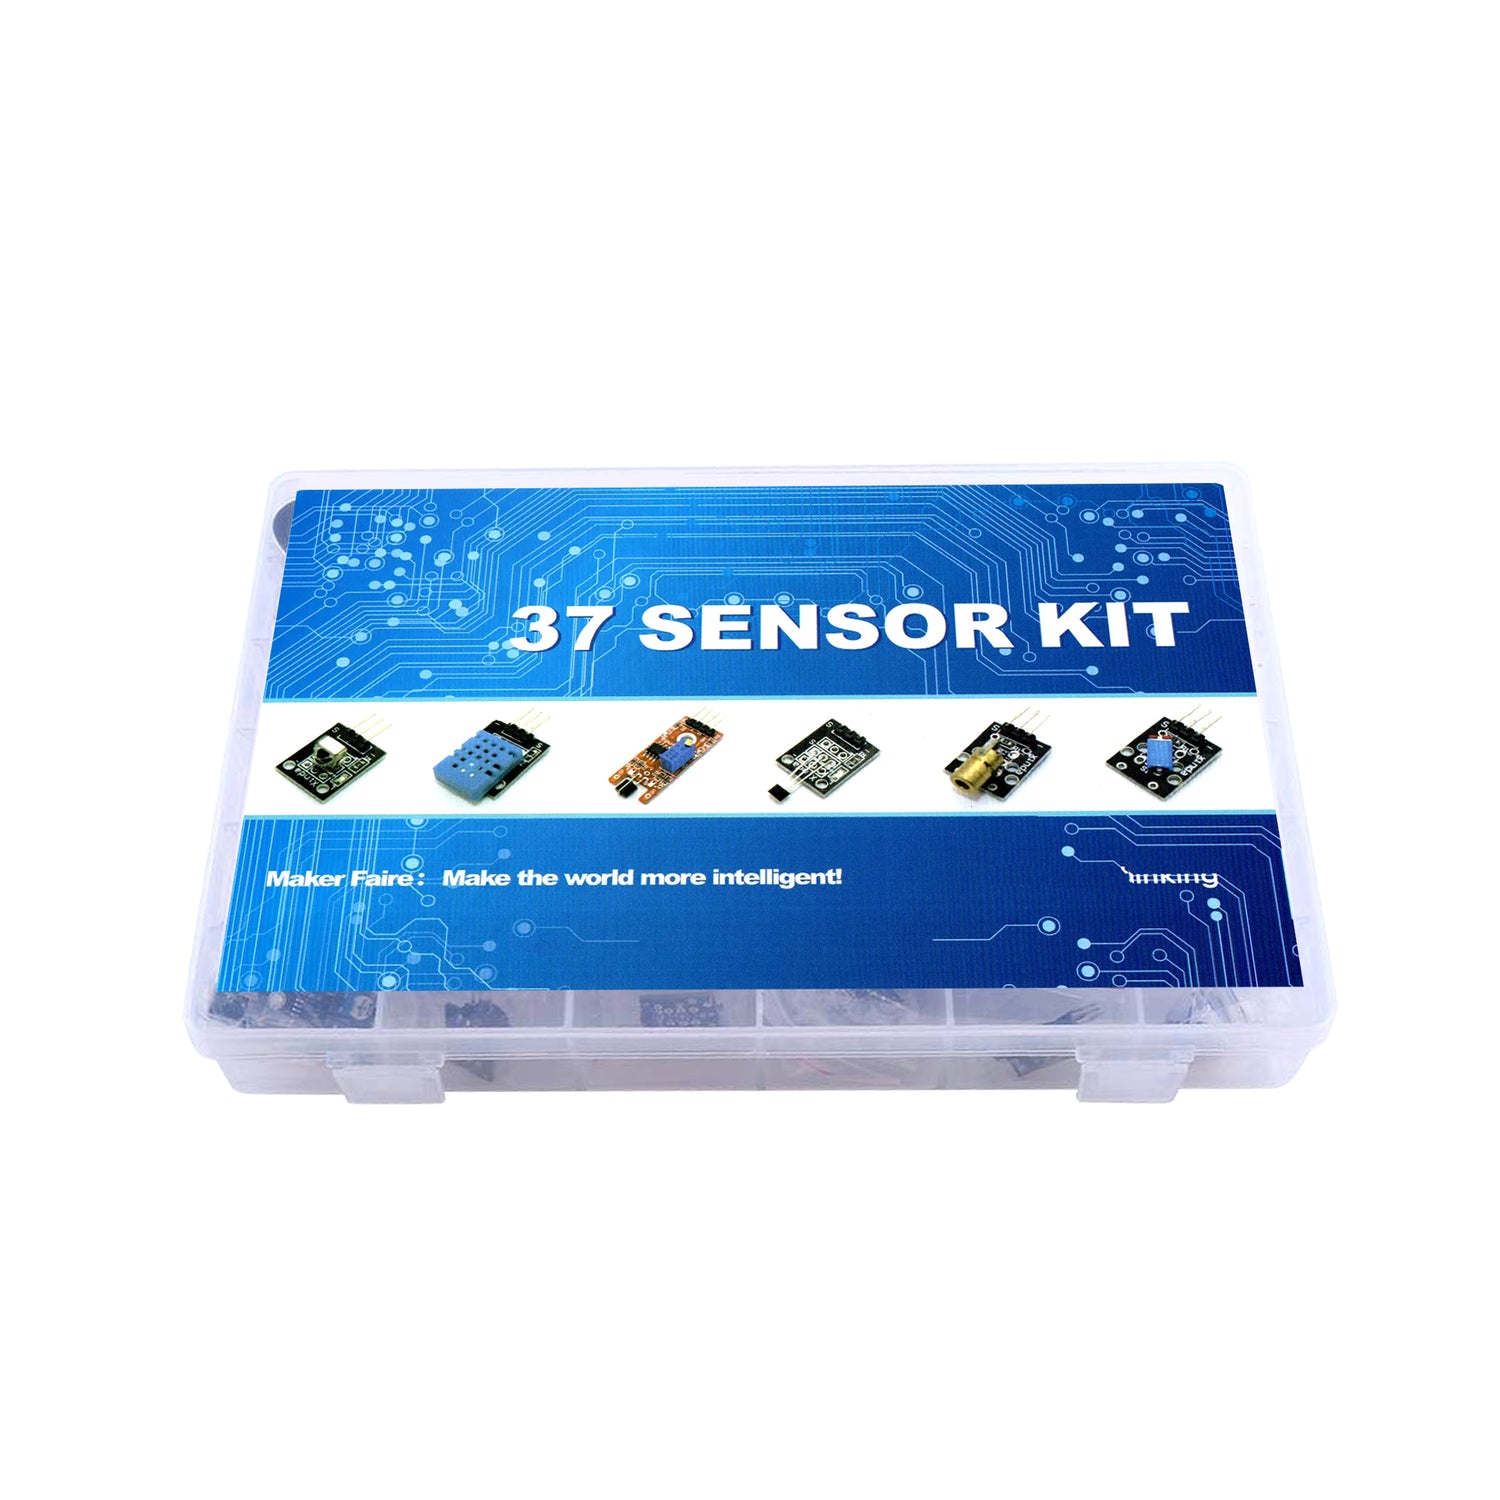 37 in 1 Sensor Kit Compatible with Arduino UNO, NodeMcu, Raspberry Pi, Robotics Projects - SR052 - REES52